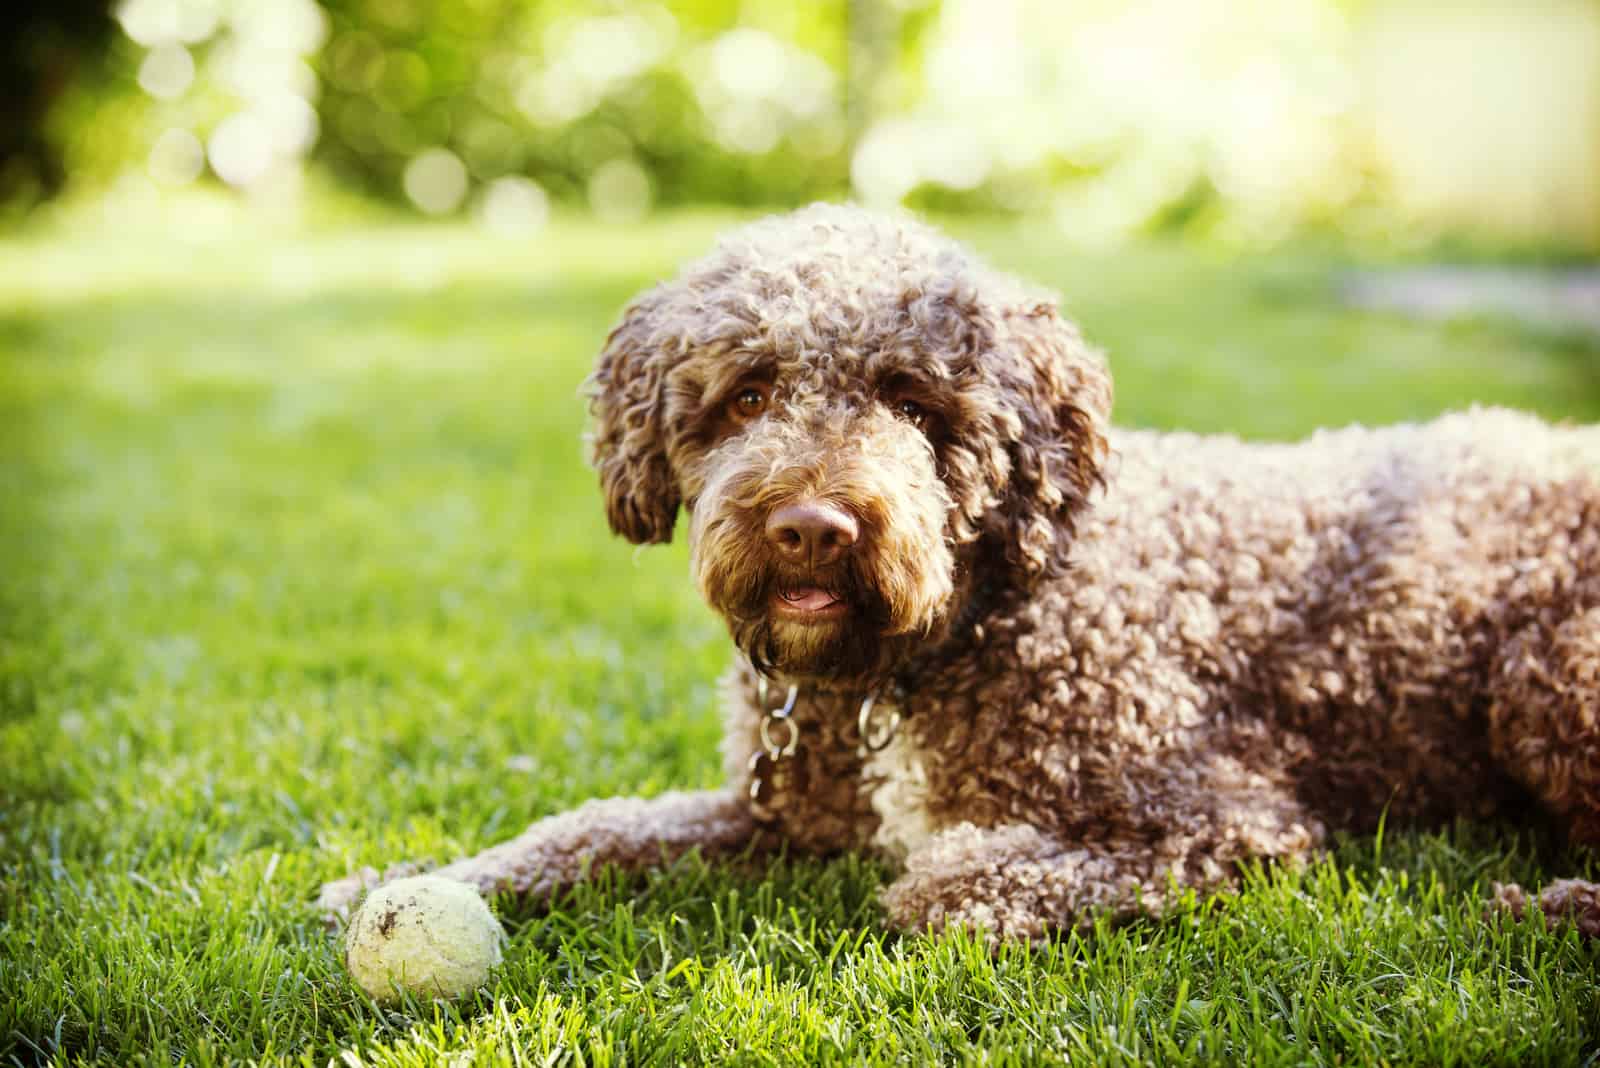 lagotto romagnolo dog lying on grass with white ball